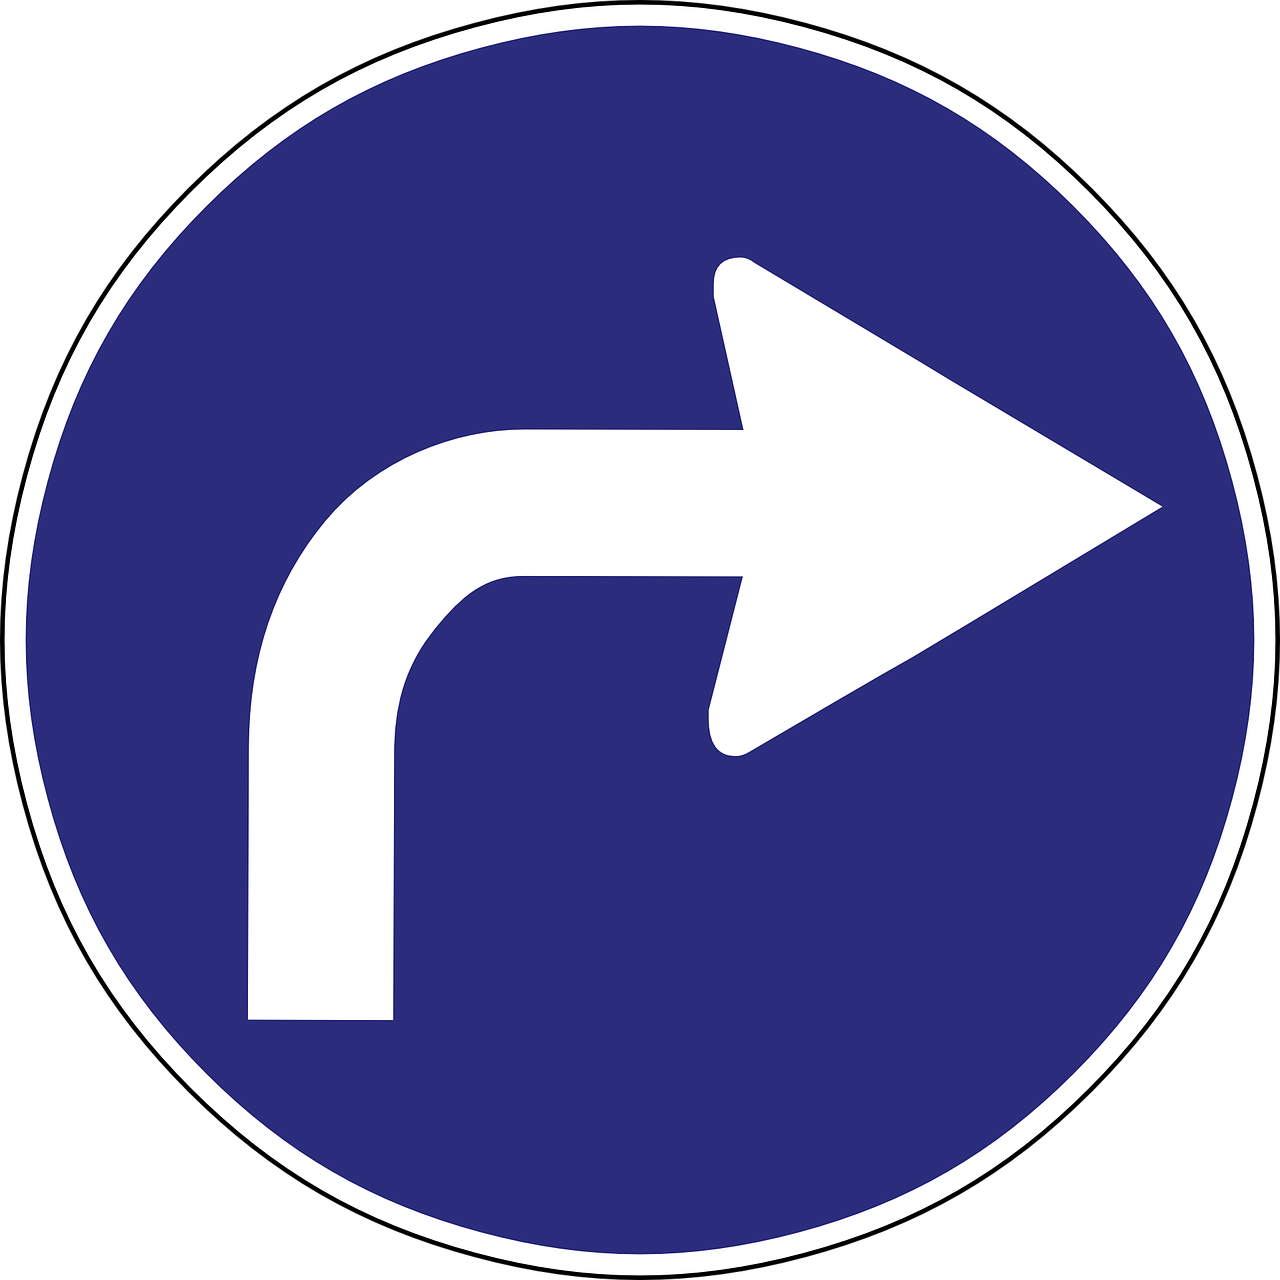 road sign direction arrow free photo